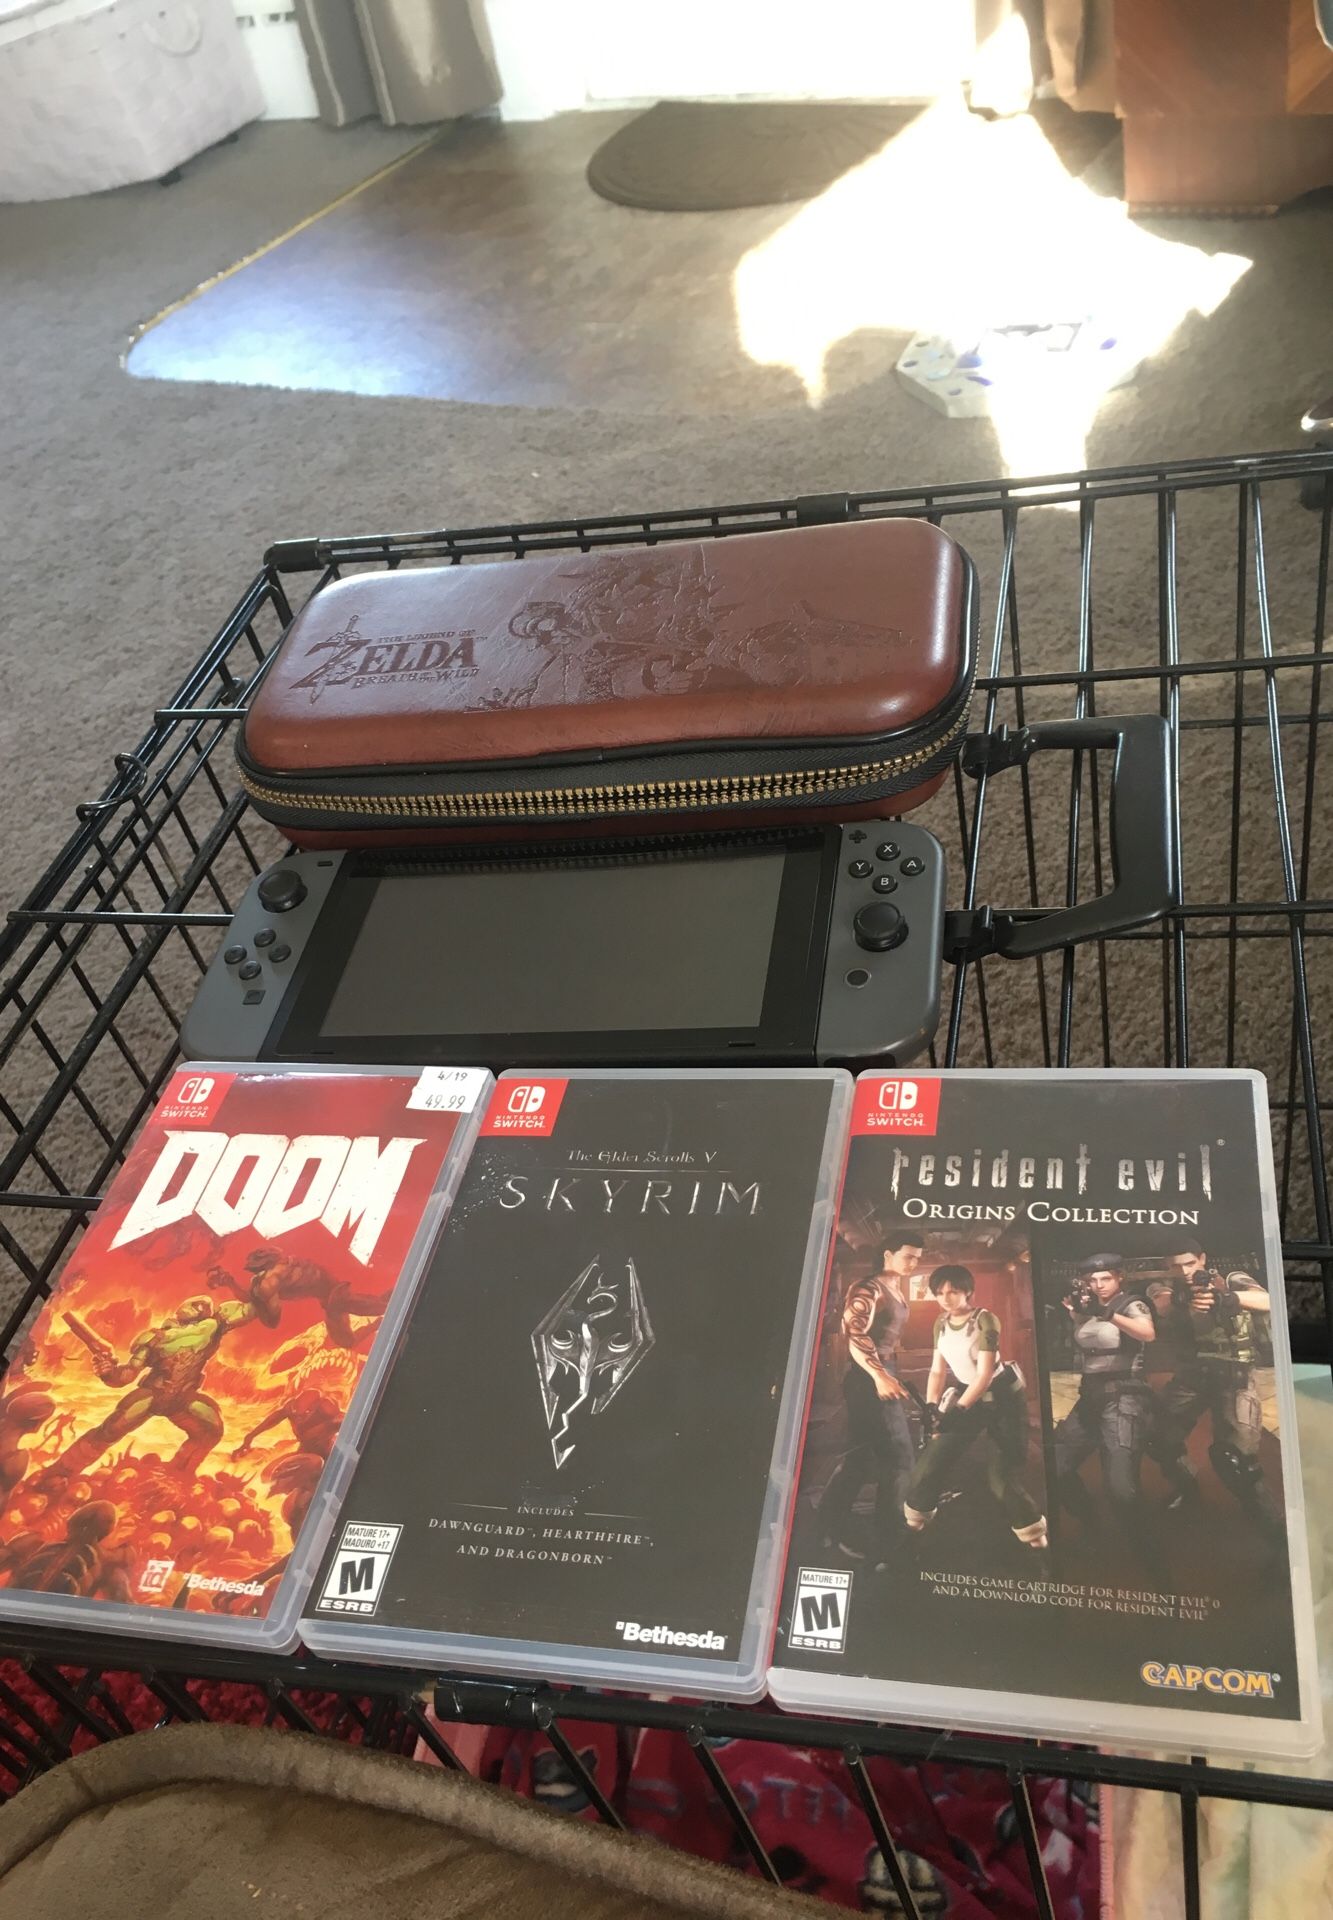 Less than a year old switch need money for bills don’t want to sell but have to resident evil sold